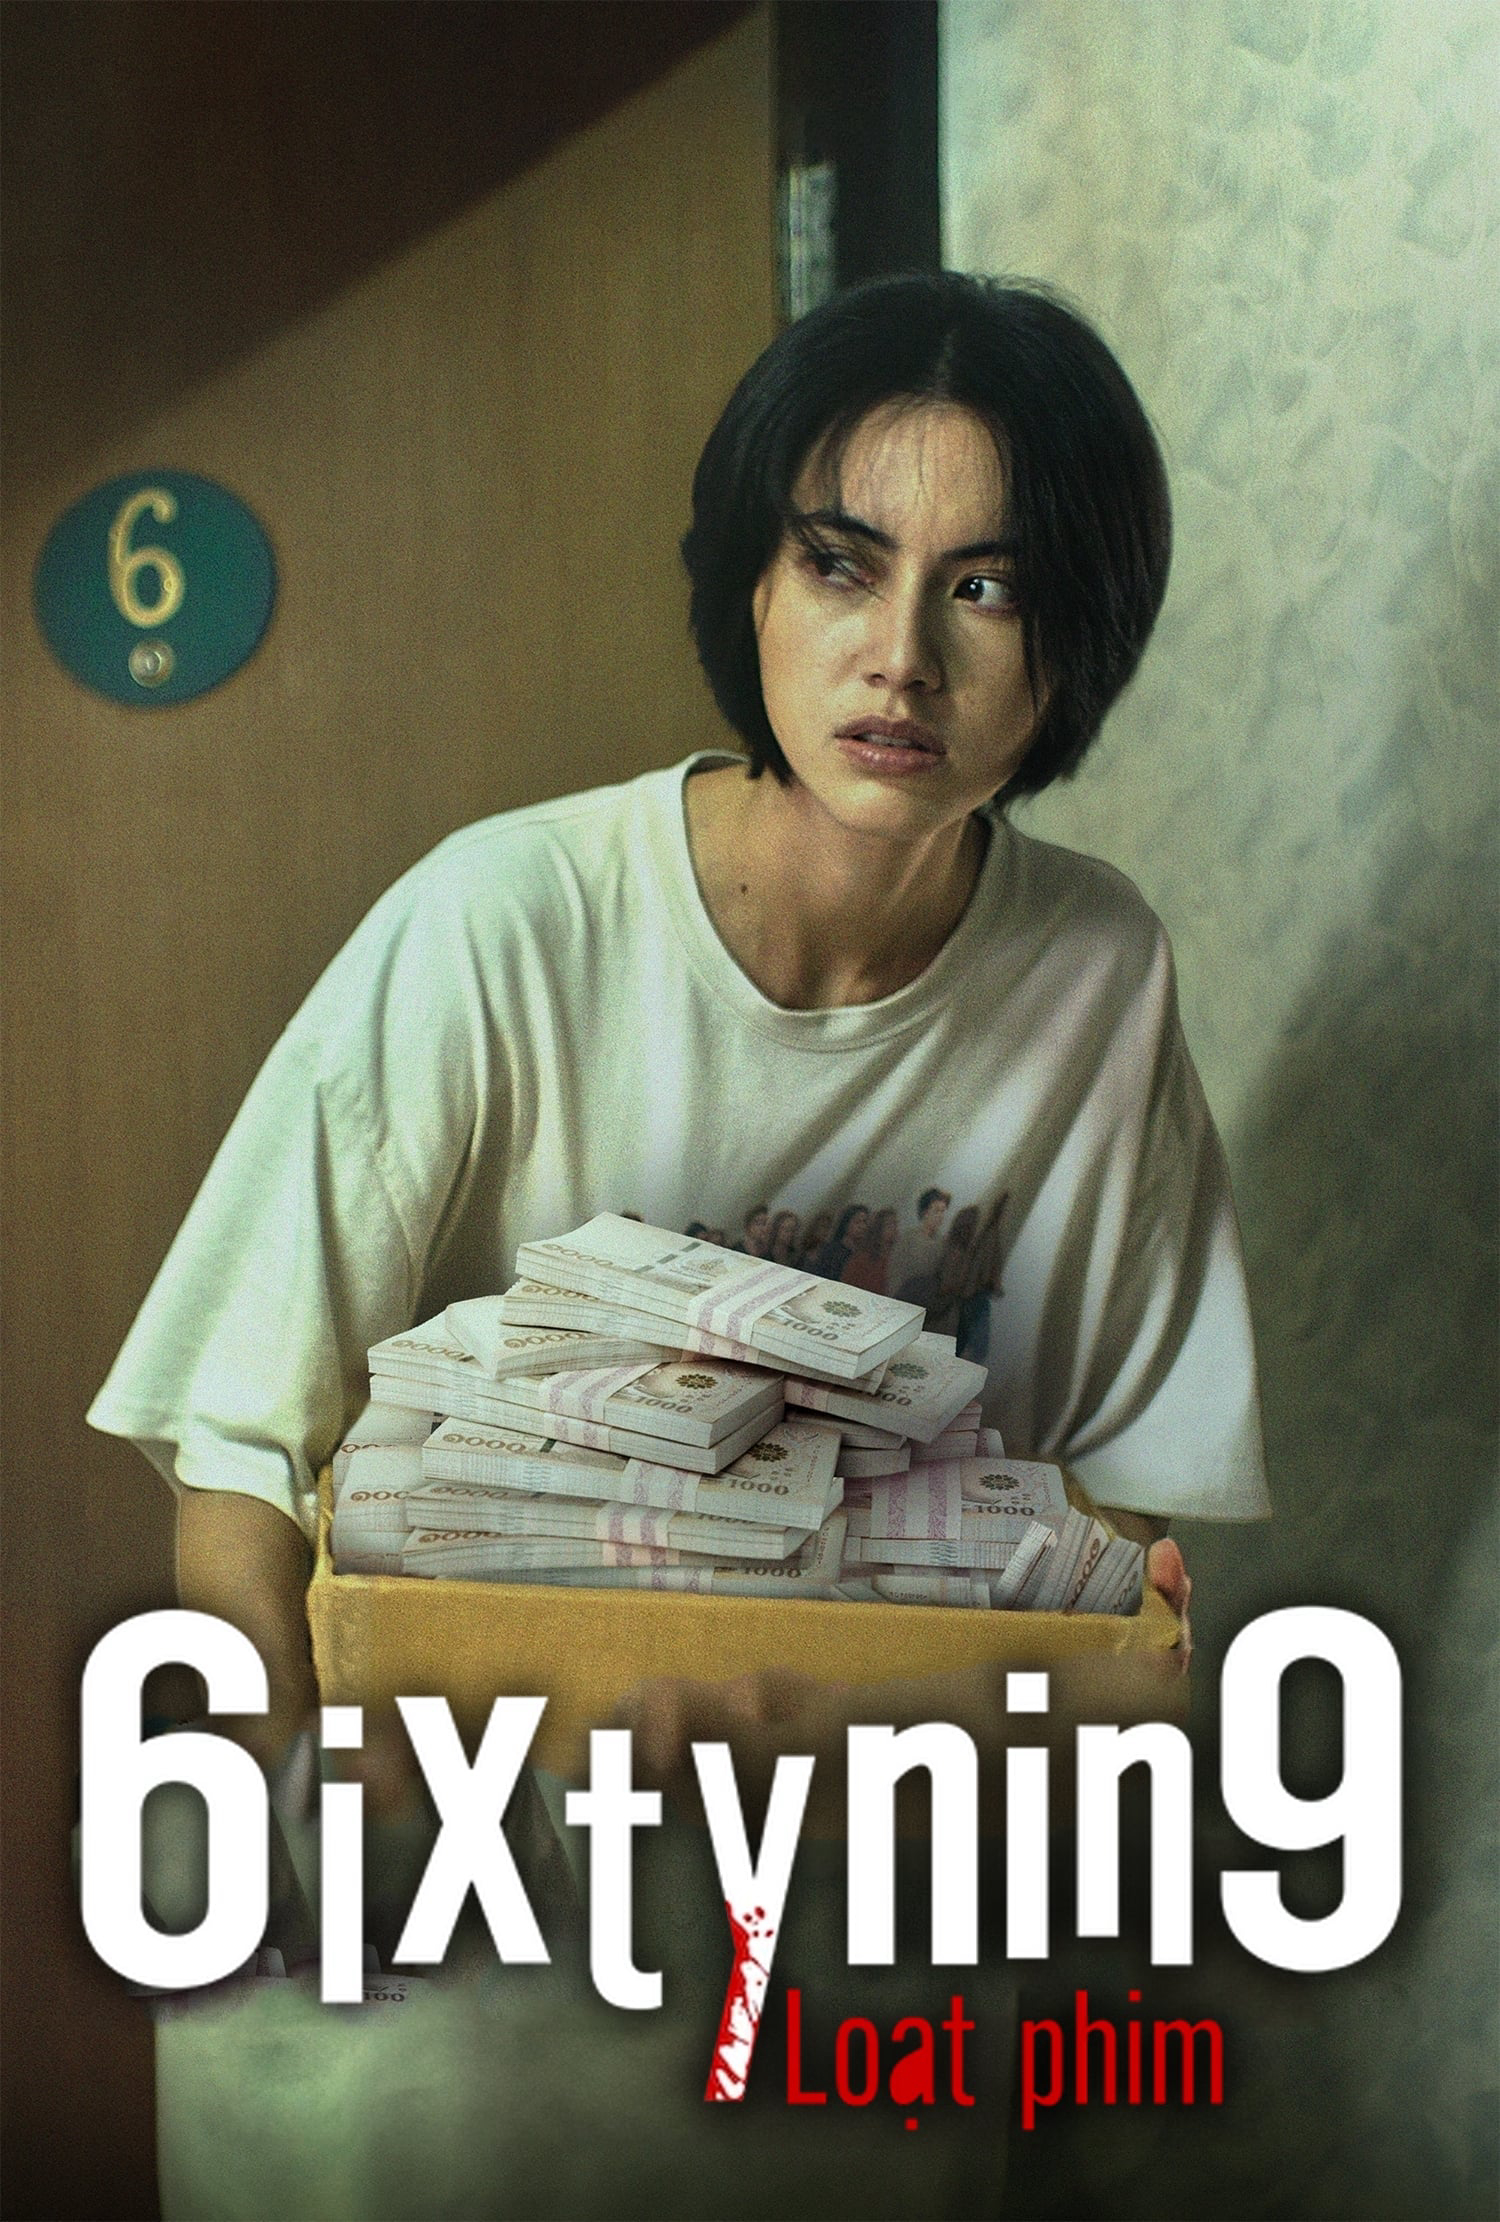 Poster Phim 6ixtynin9 Loạt phim (6ixtynin9 the Series)